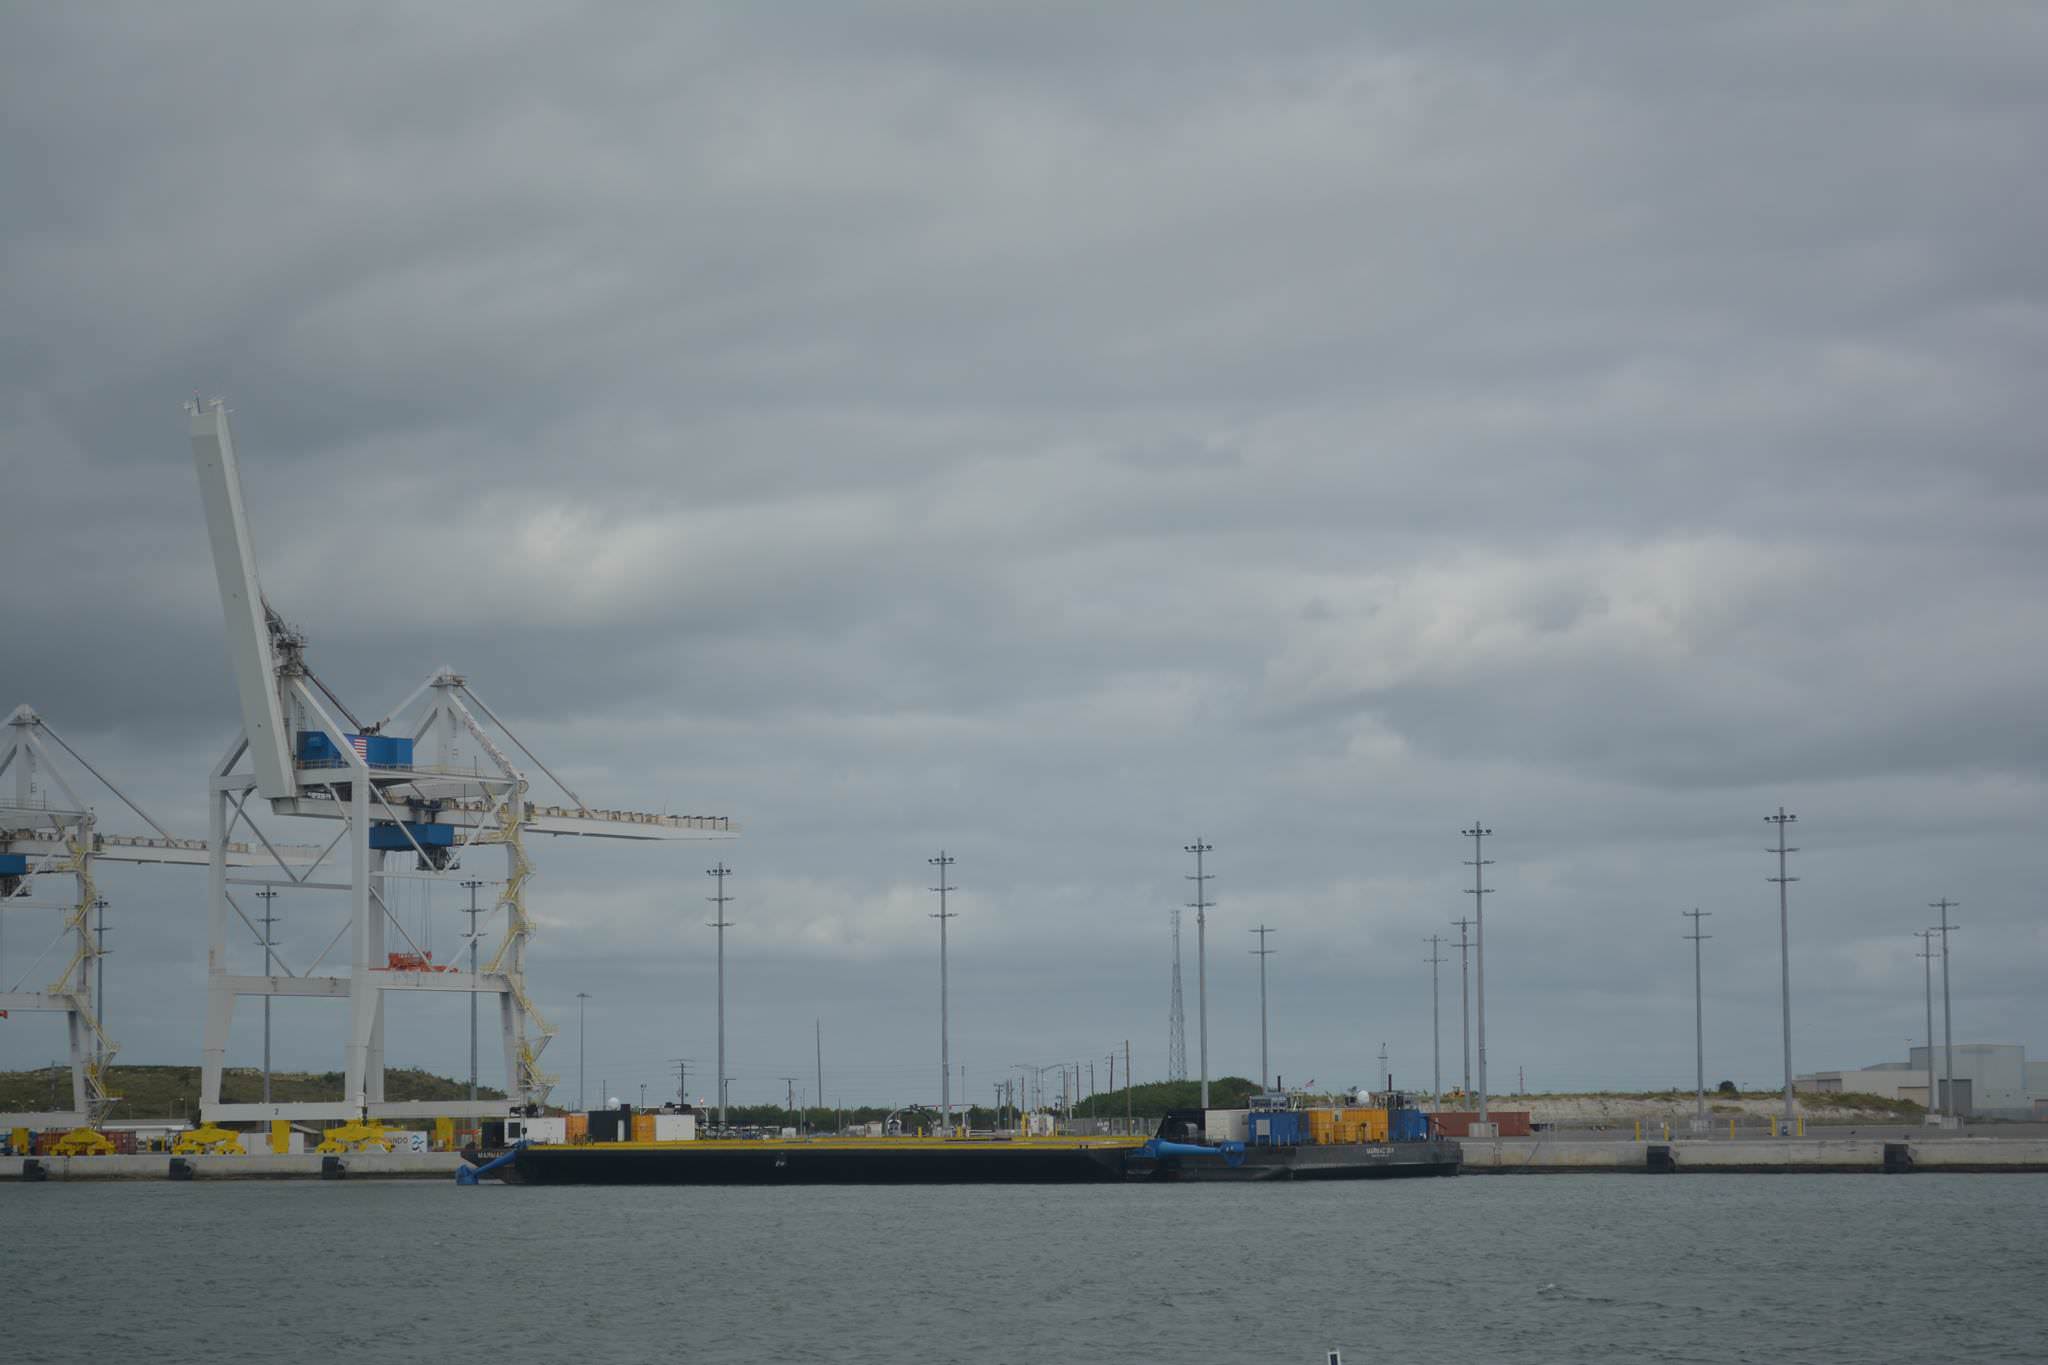 A barge used by SpaceX on previous landing attempts in the Atlantic Ocean was spotted in Port Canaveral on Sunday, Dec. 20, 2015 but apparently not deployed out to sea.  Credit: Mark Herman/Spaceheadnews.com